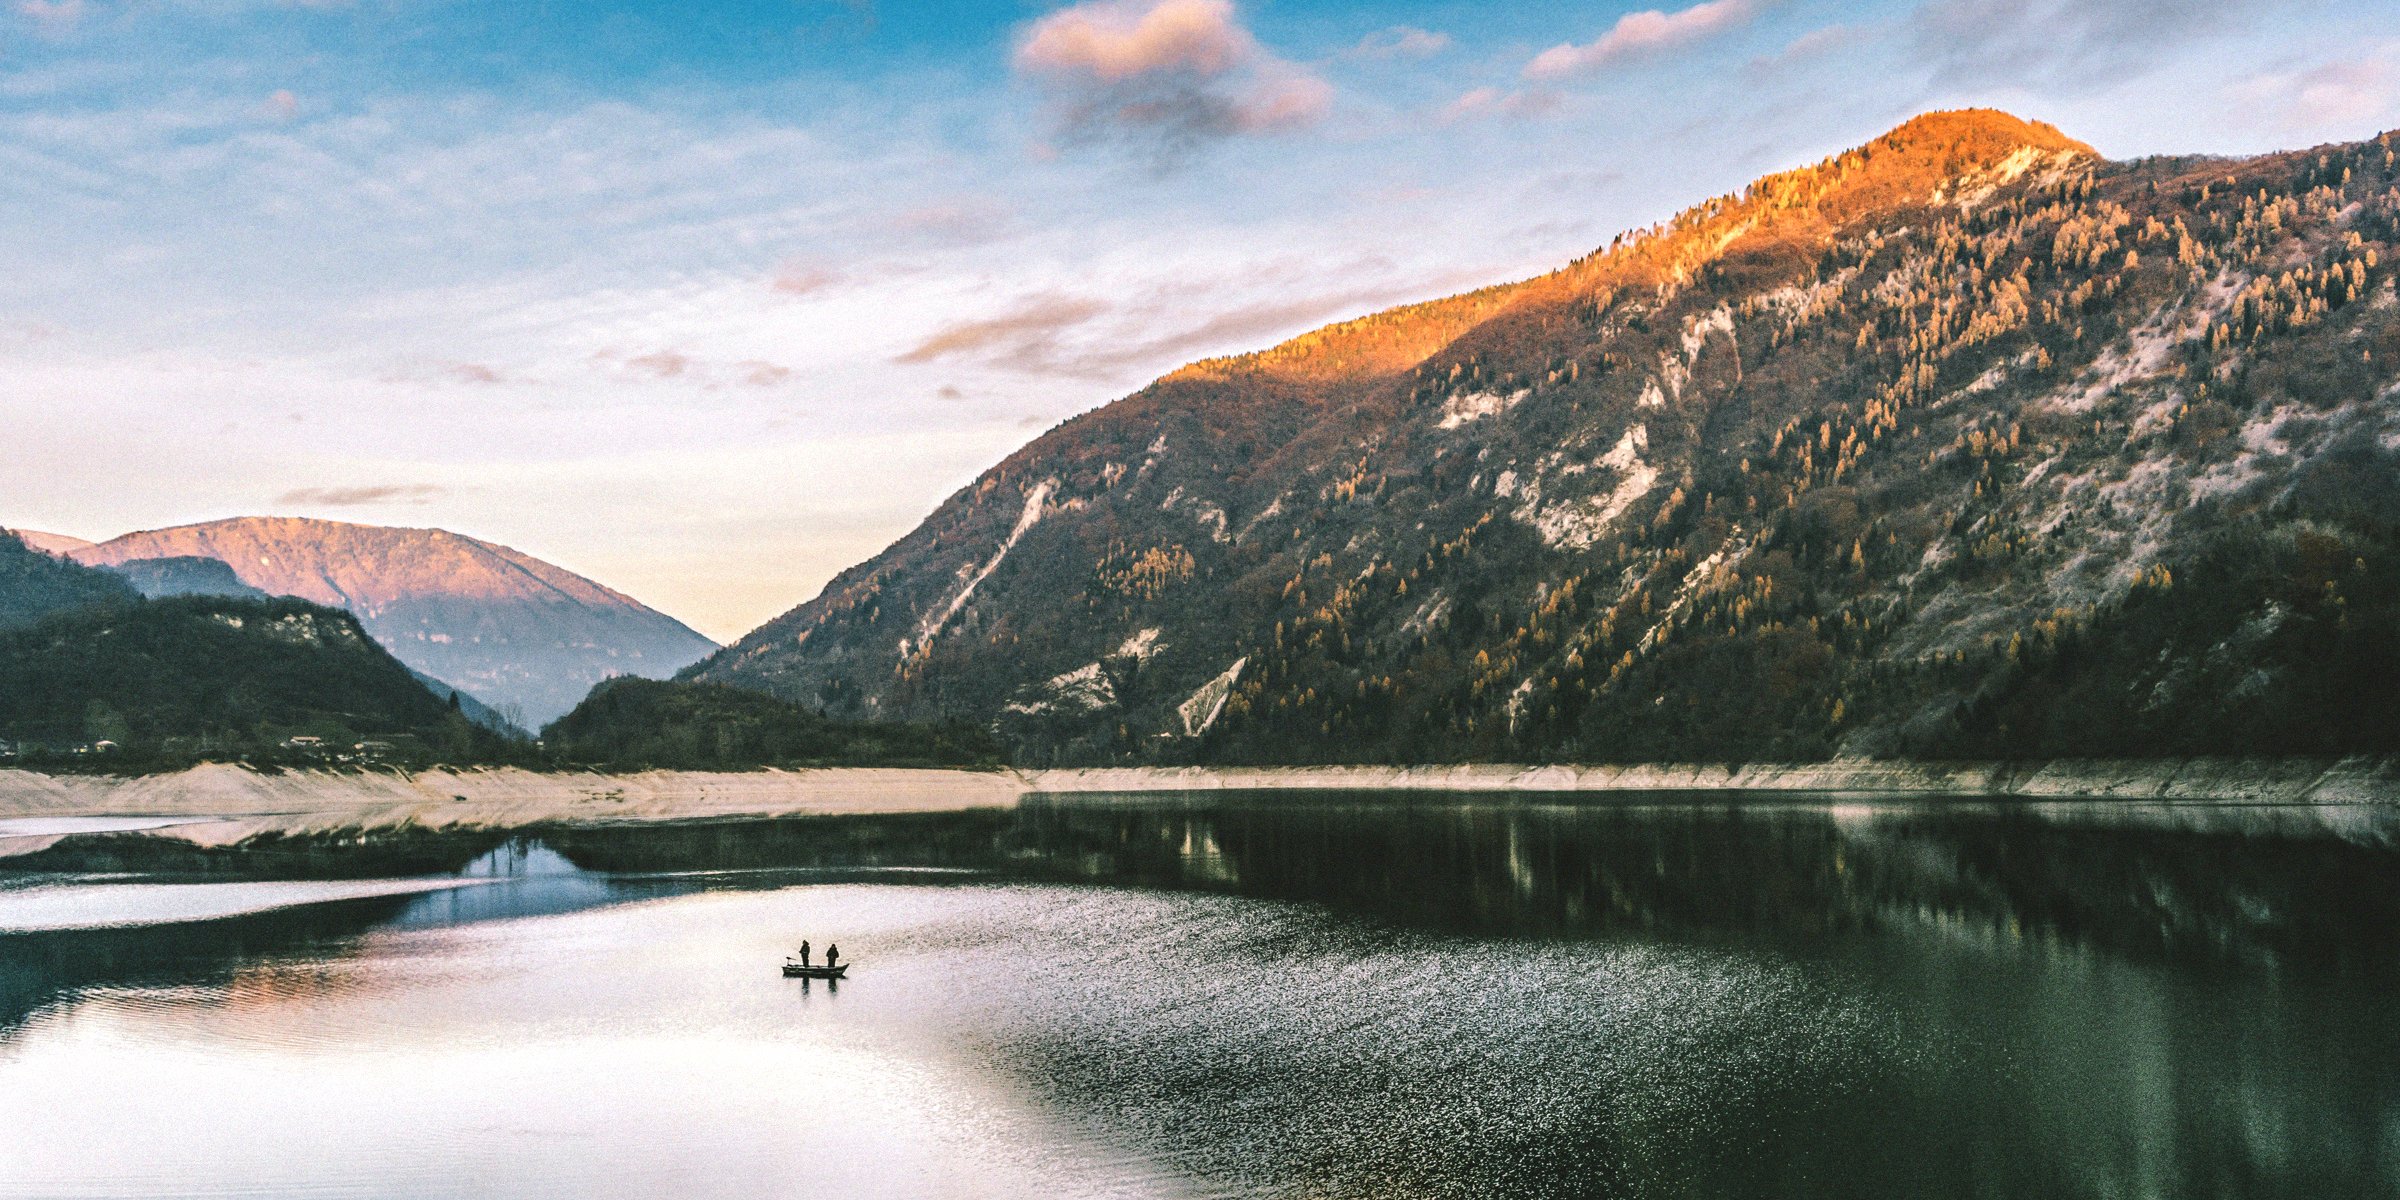 Picture of a landscape with a body of water and mountains | Source: Unsplash